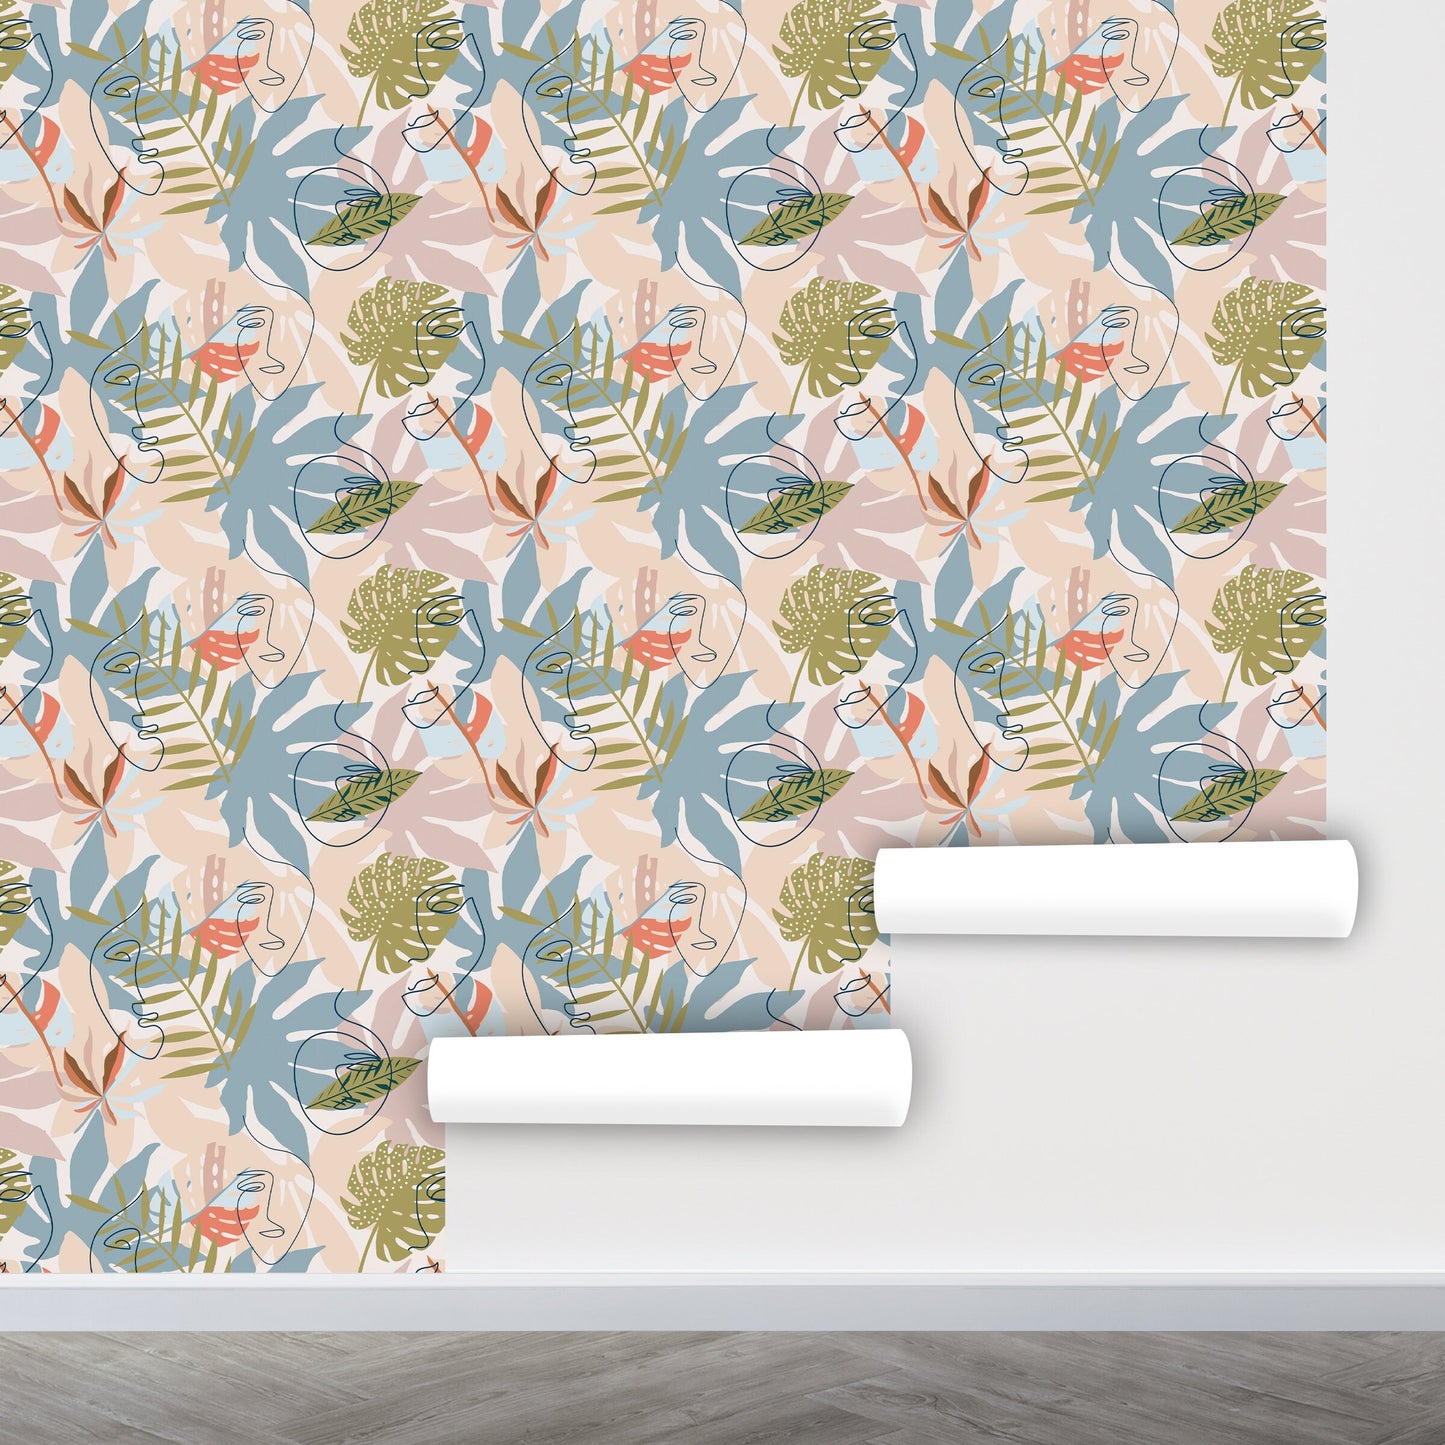 Abstract Tropical Wallpaper Peel and Stick, Palm Leaves Wallpaper, Face Wallpaper, Removable Wall Paper